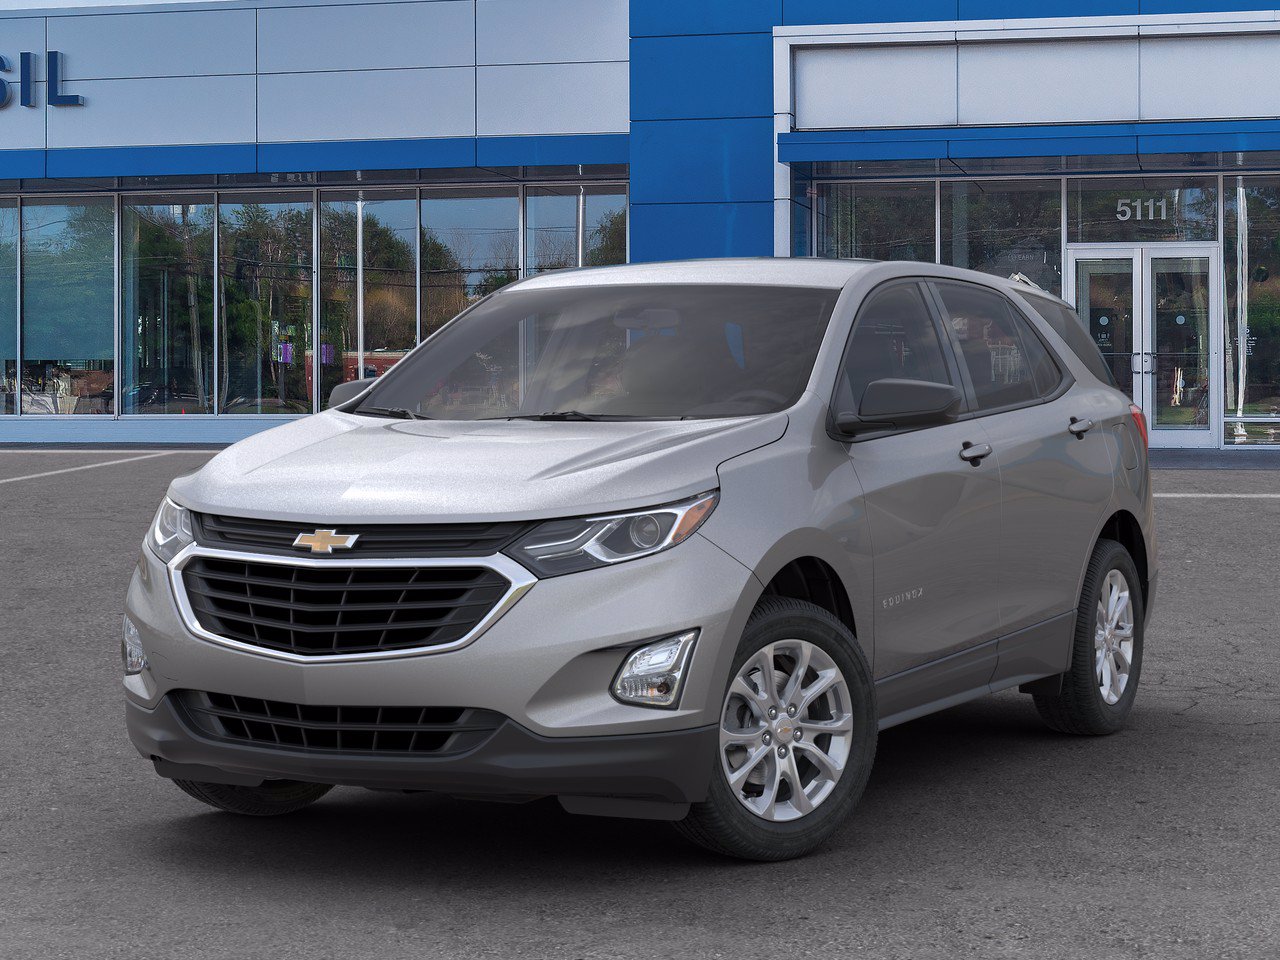 new 2020 chevy equinox for sale near me